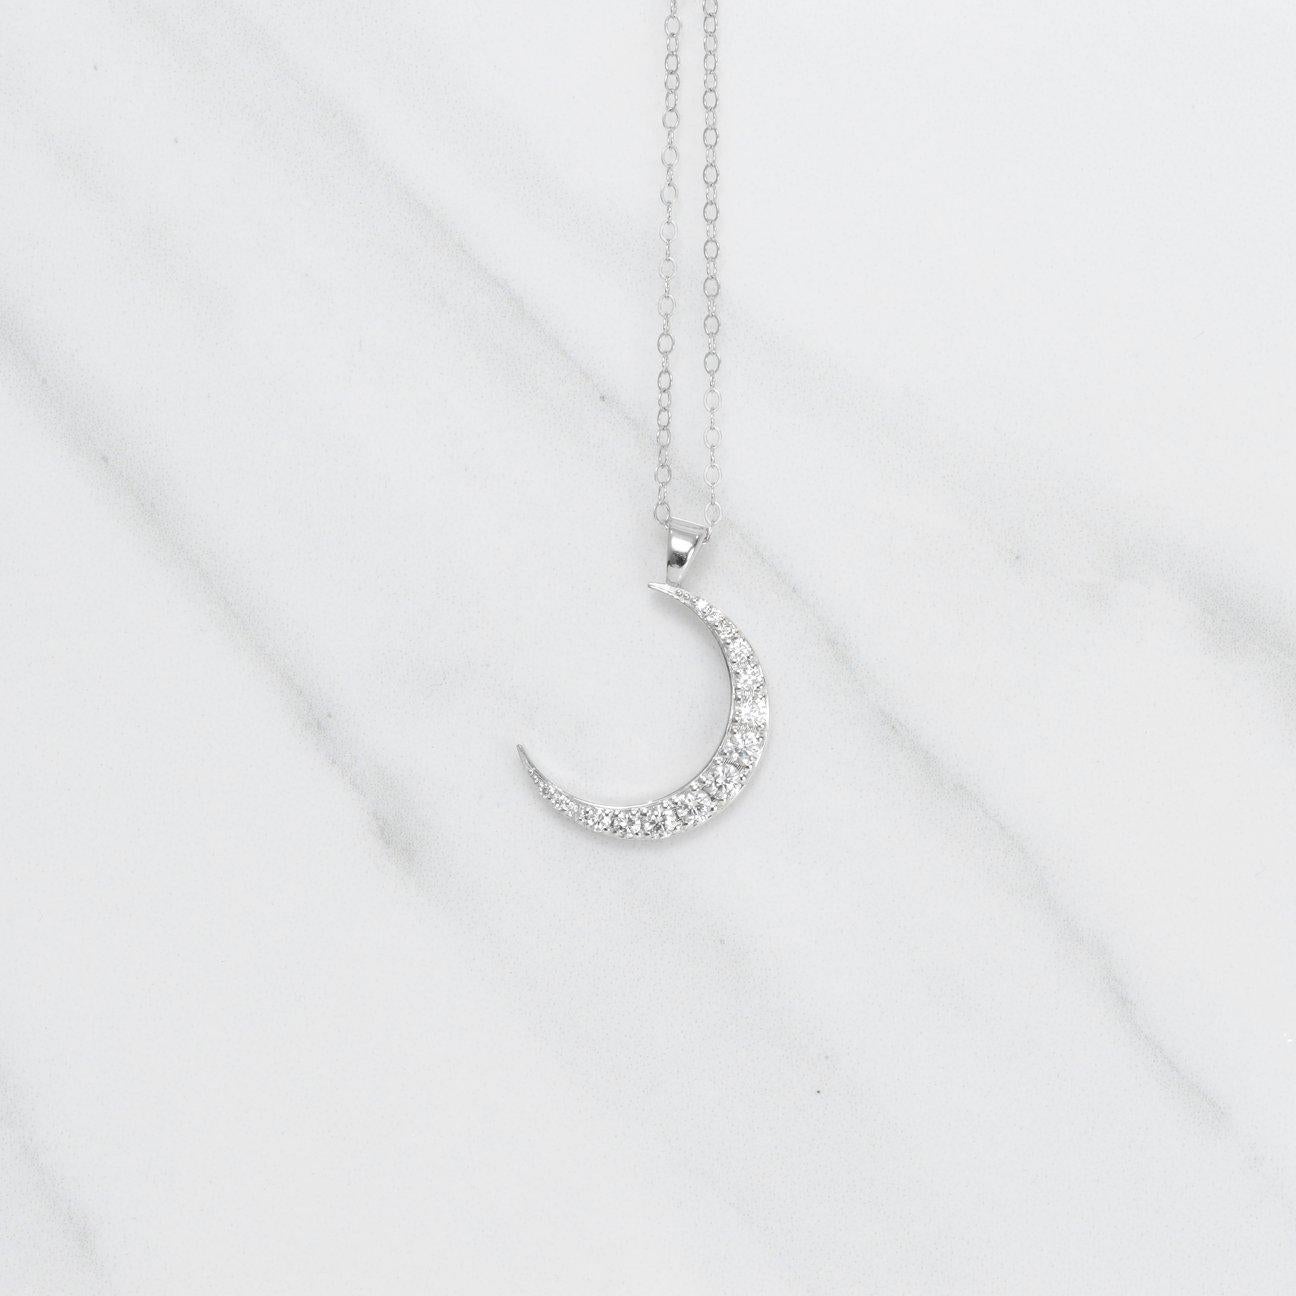 A pendant that truly glistens! This stunning diamond crescent moon pendant necklace is filled with .49 carats of beautiful diamonds, that are all set in 14k white gold. The moon pendant measures 25mm in length.